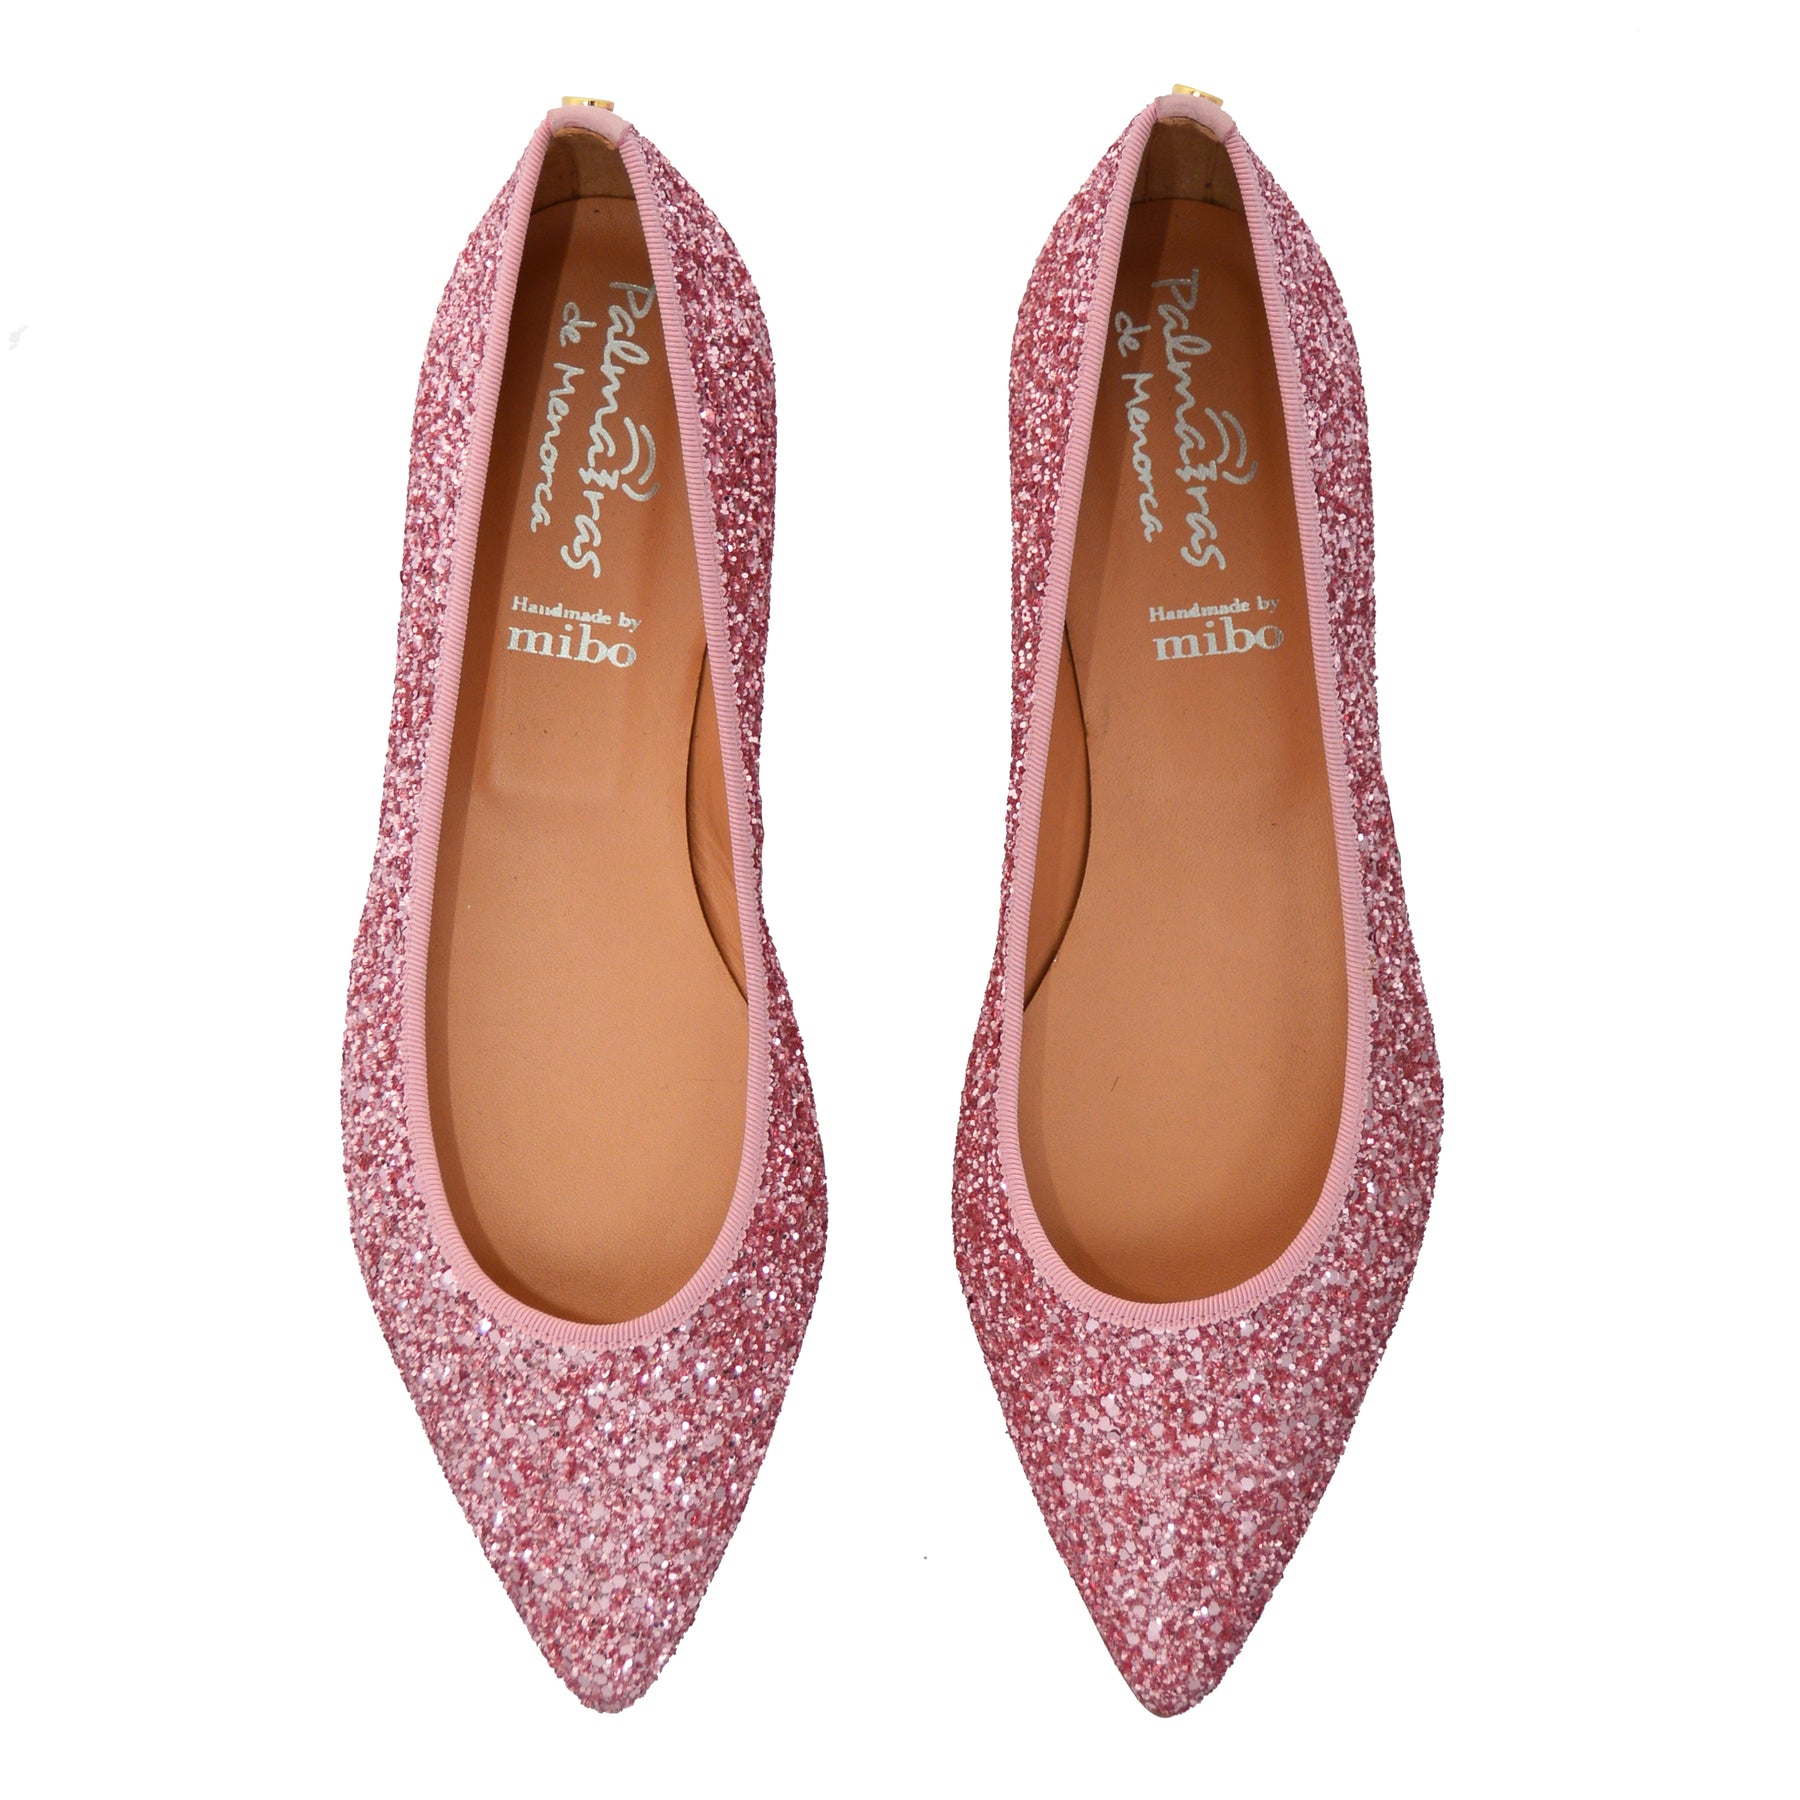 candy pink glitter ballet pump leather lined flat shoes